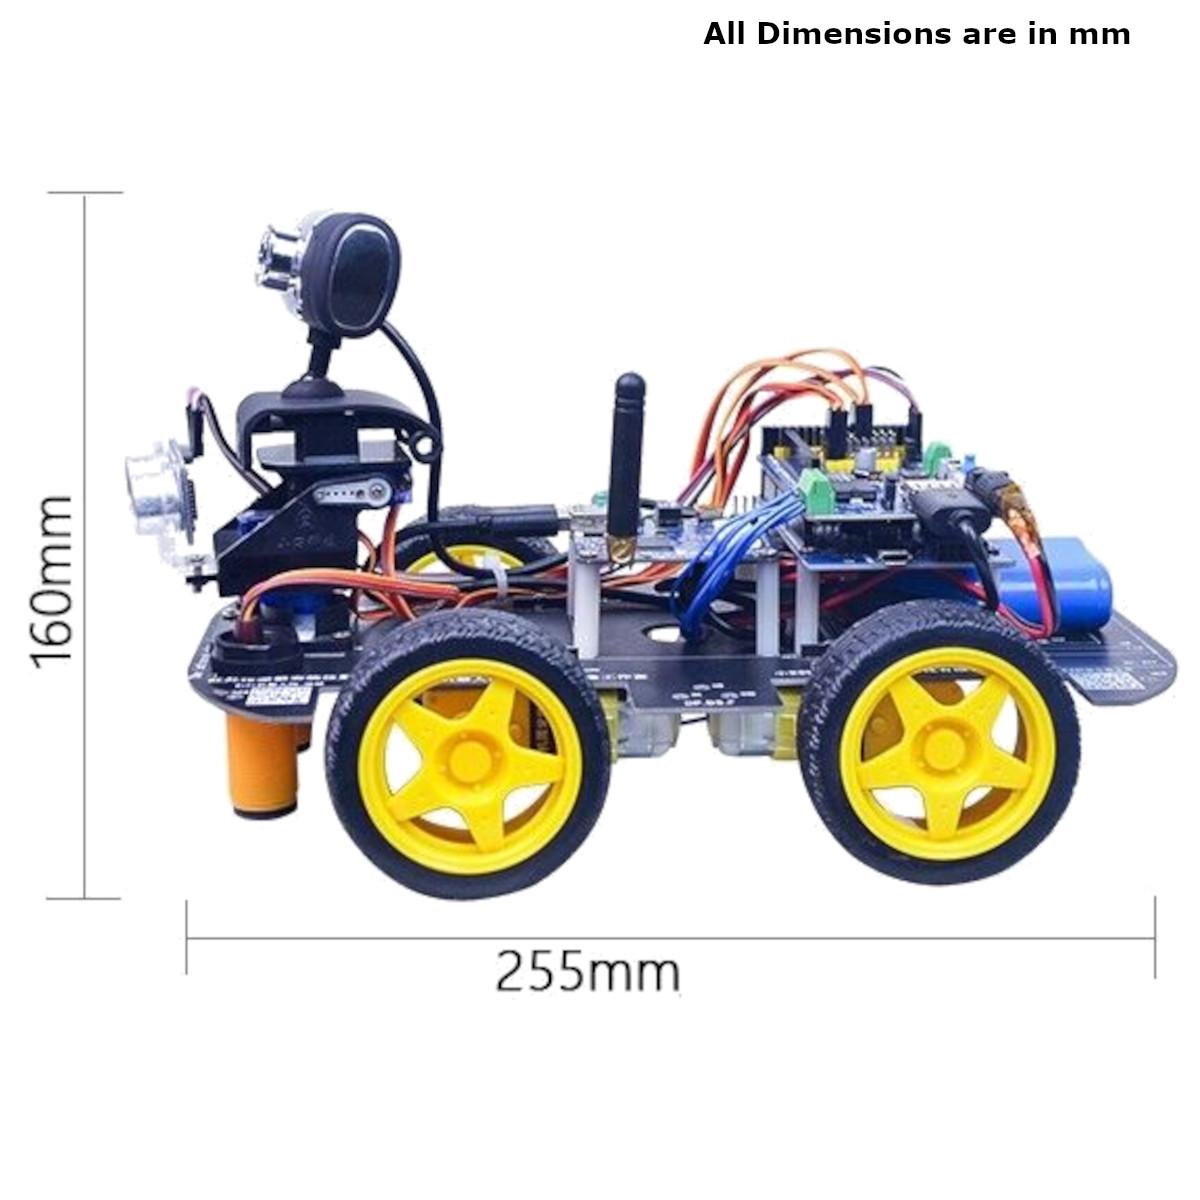 Xiao R Smart RC 4 Wheel Drive Programmable Robot Car Dimensions